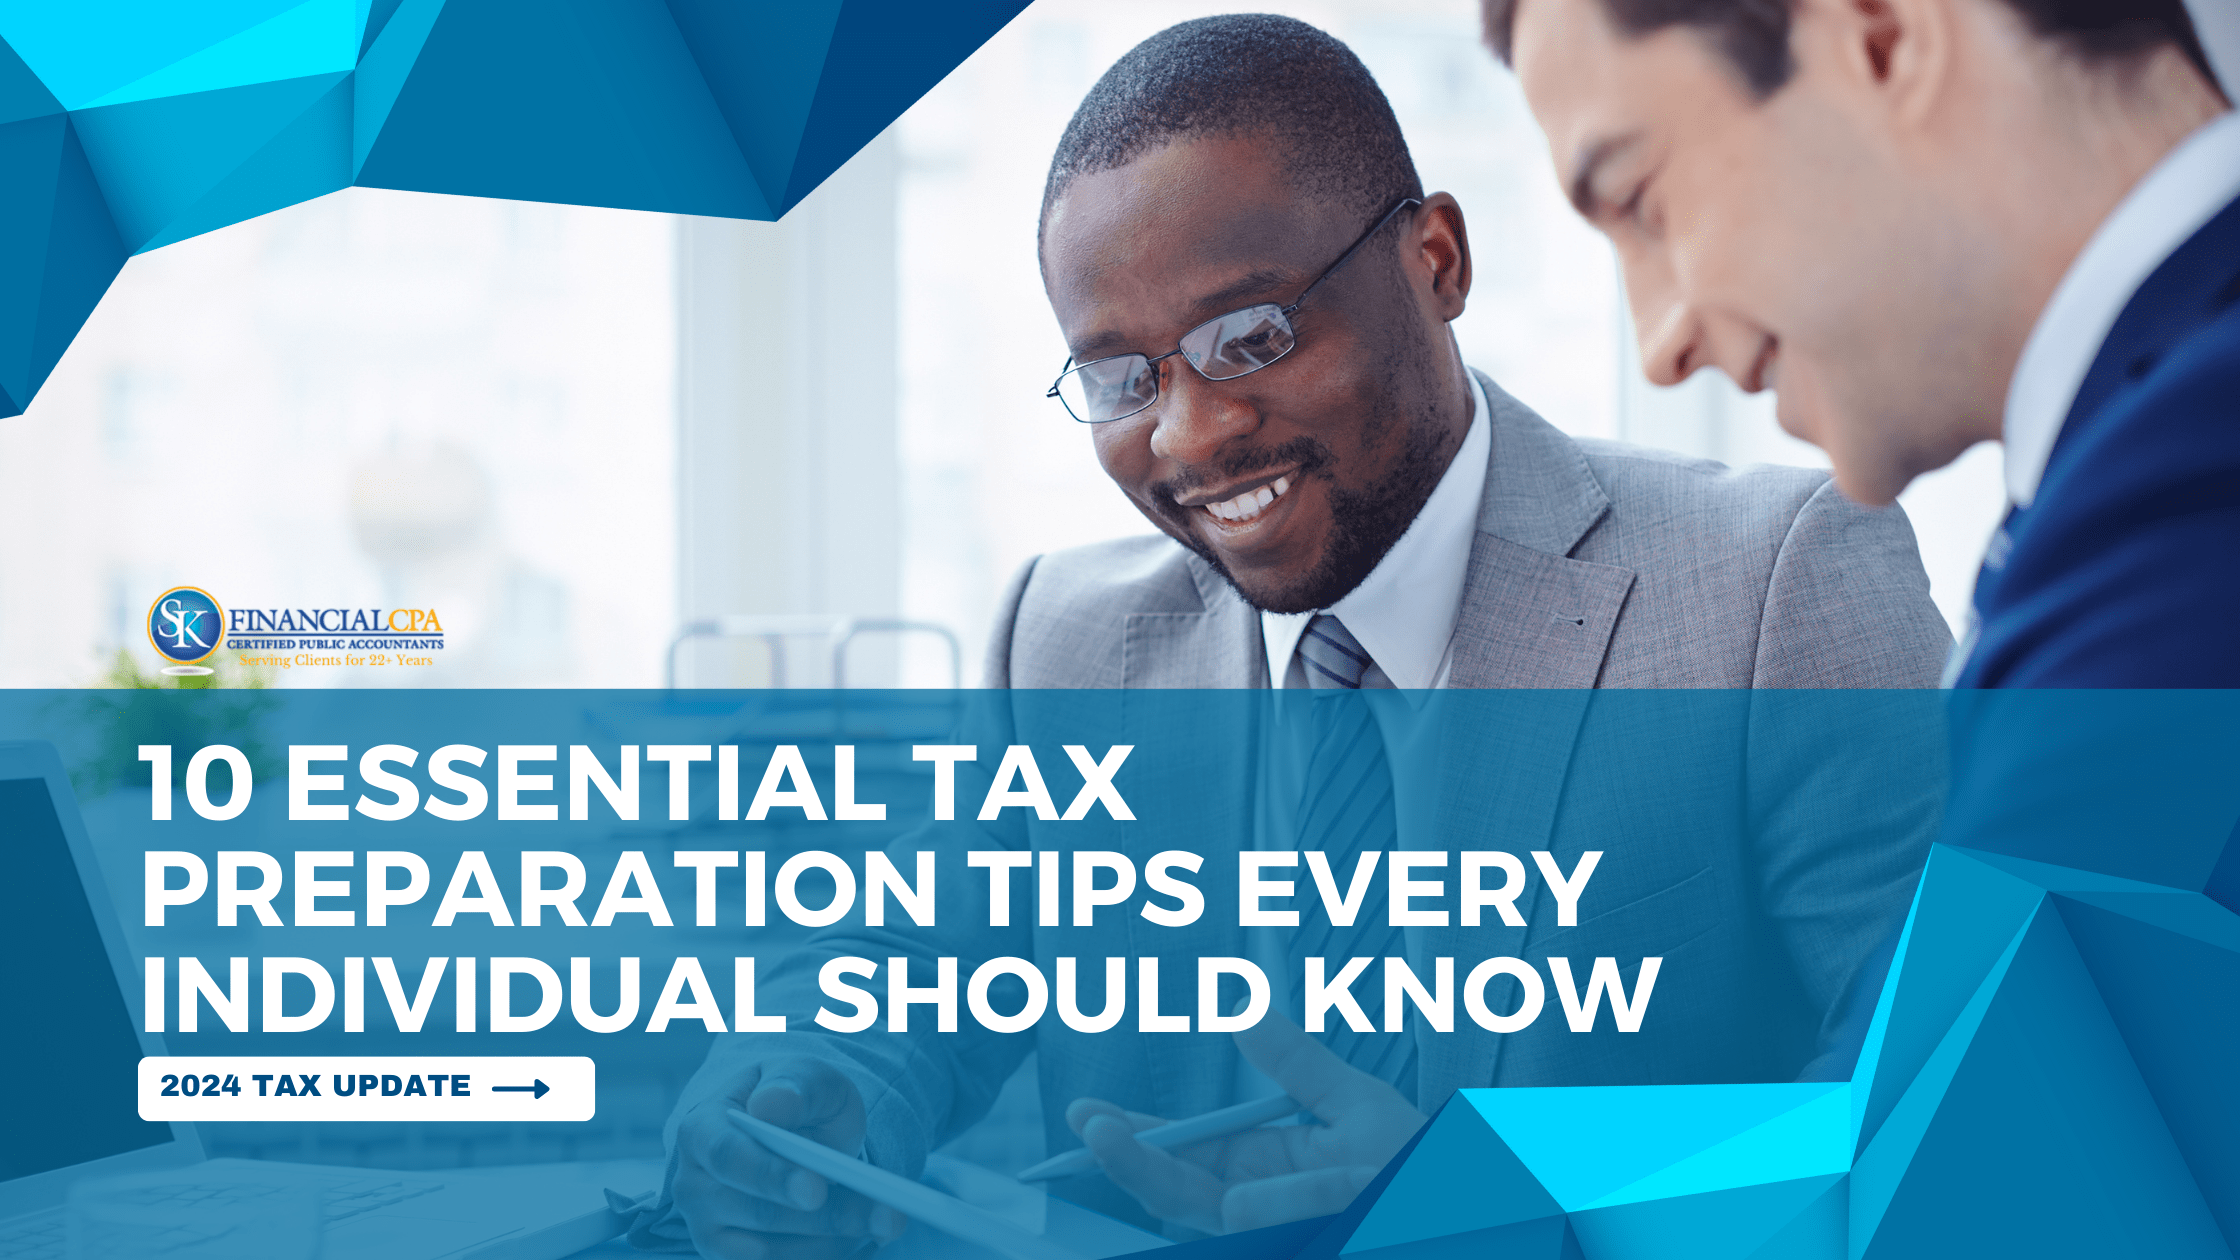 10 Essential Tax Preparation Tips Every Individual Should Know